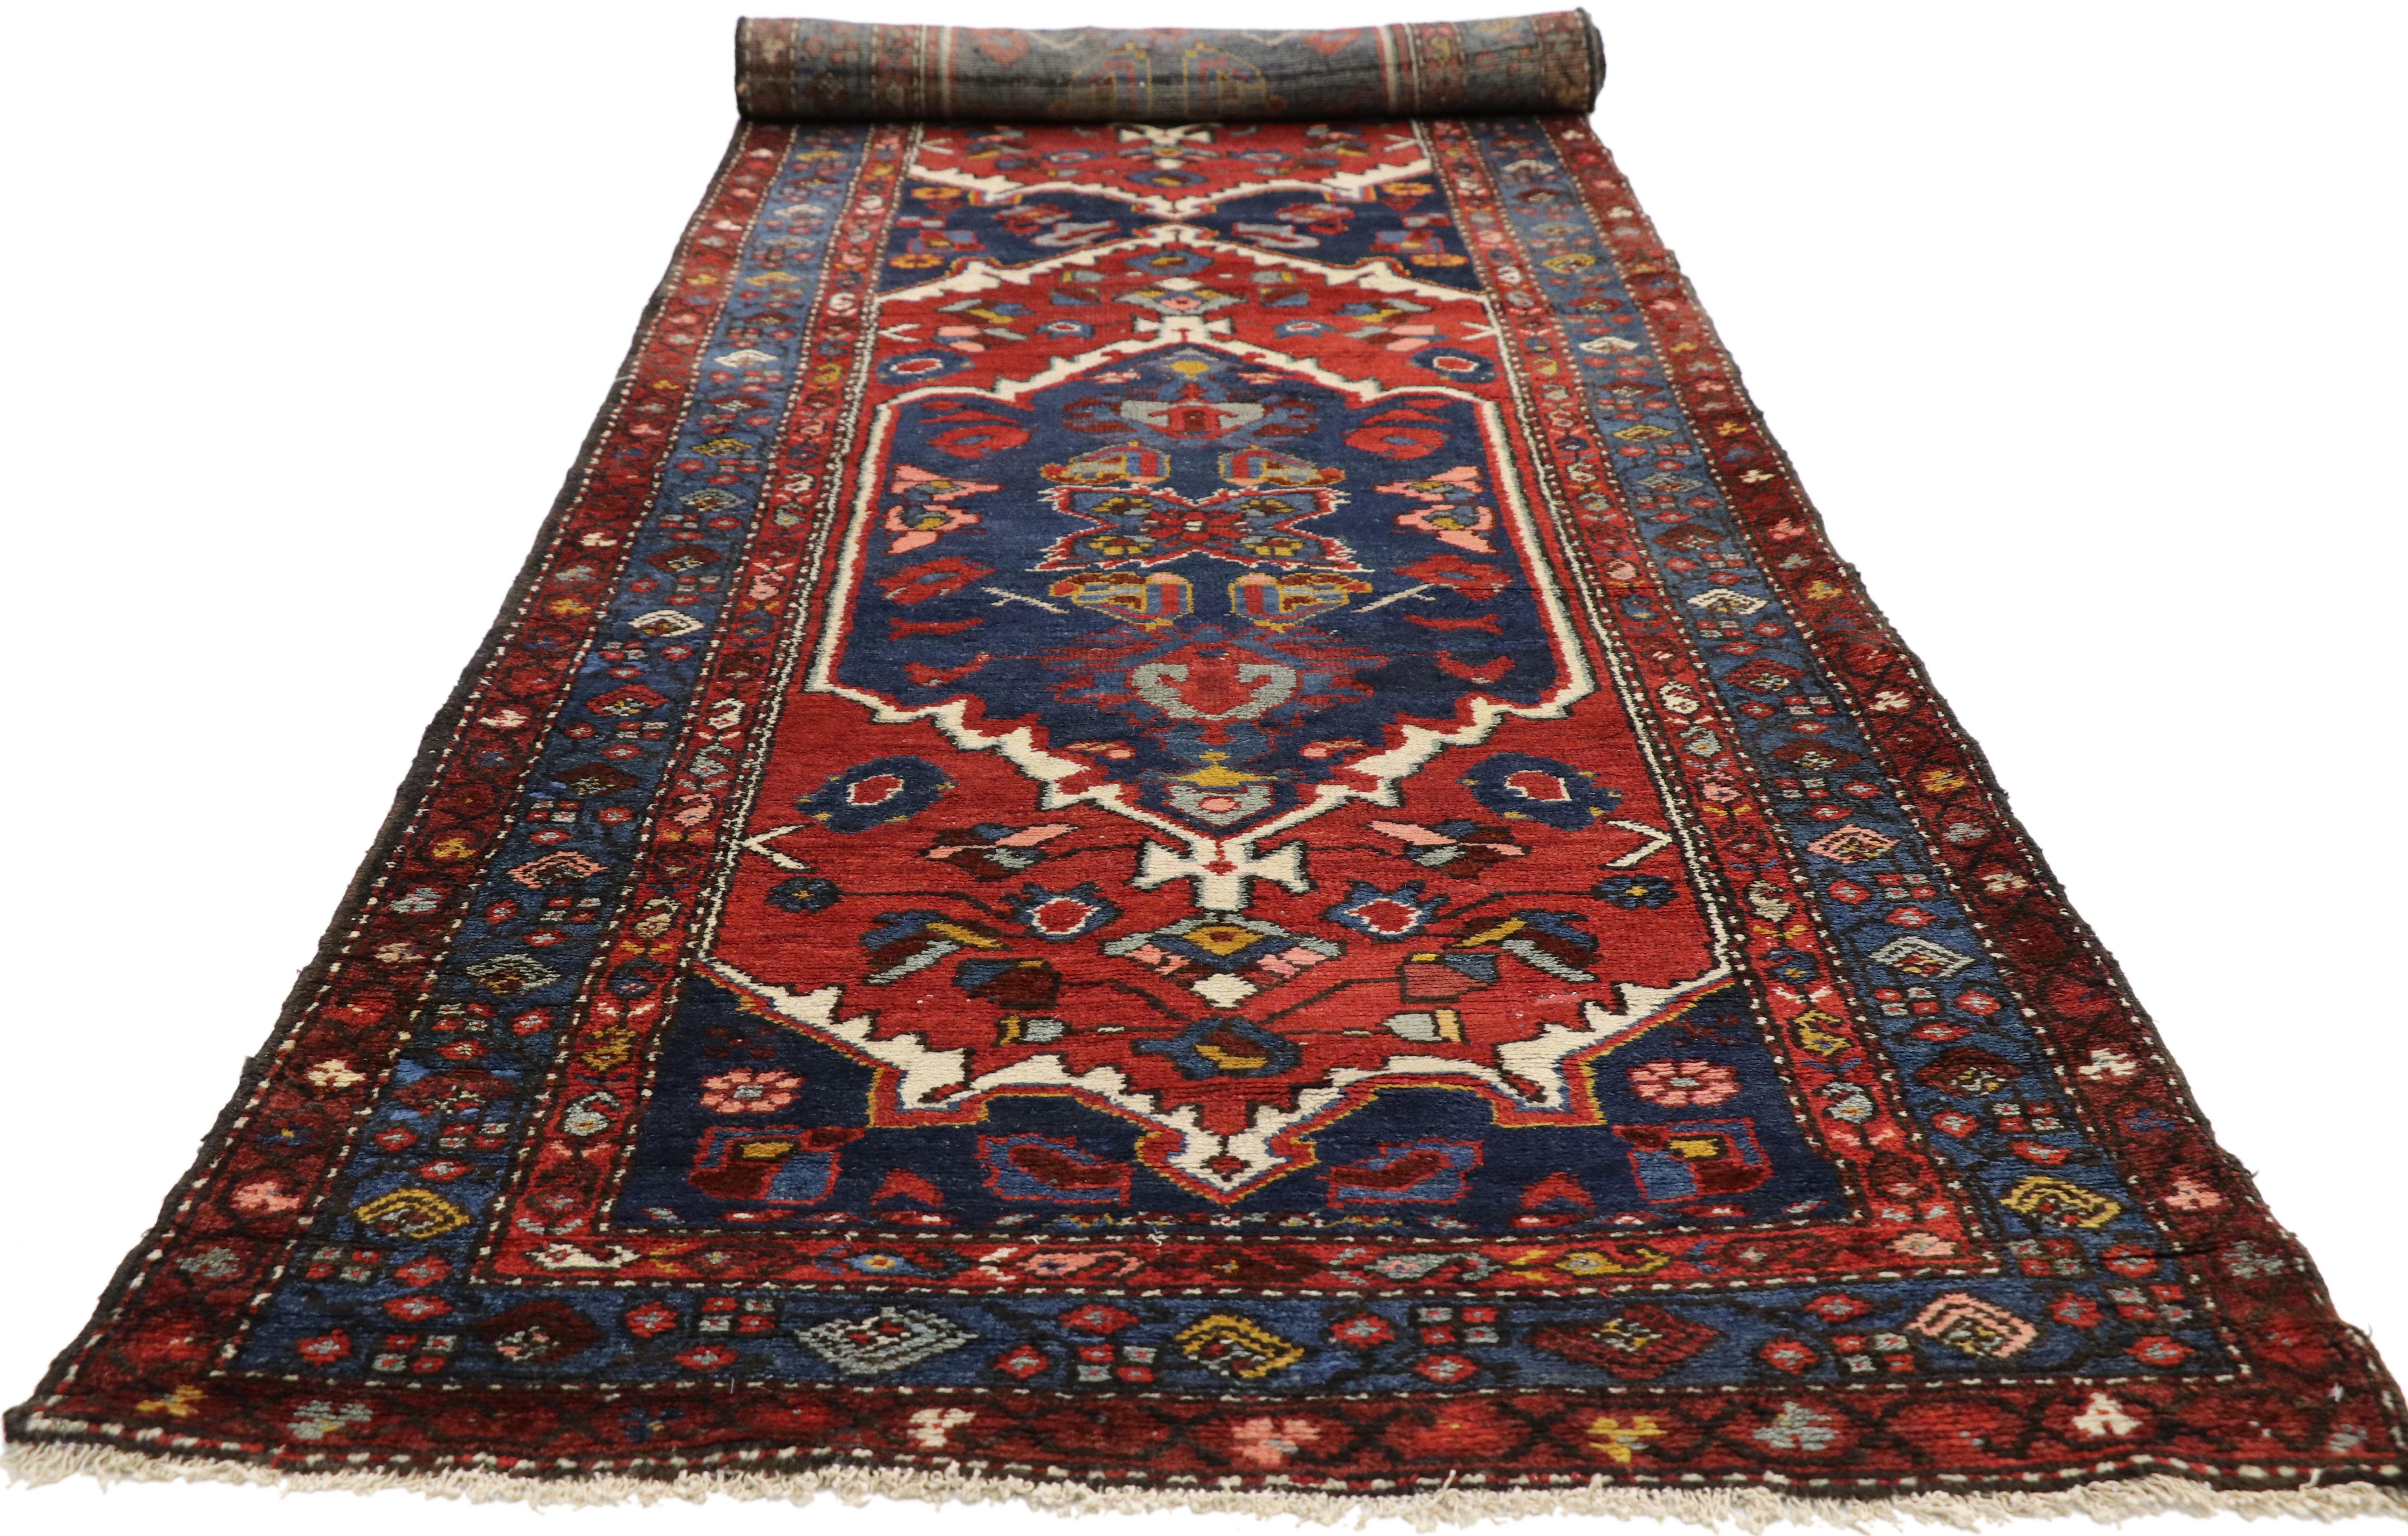 Hand-Knotted Antique Persian Hamadan Extra-Long Hallway Runner with English Manor Tudor Style